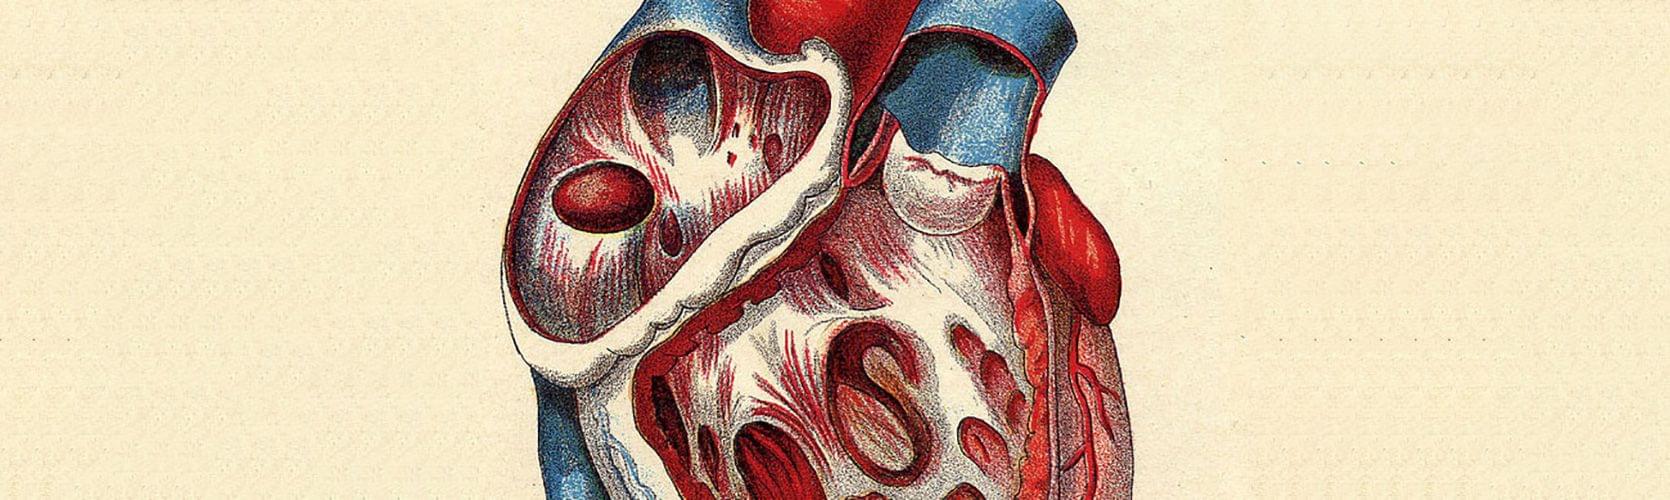 Close-up medical illustration of the chambers of the heart muscle.